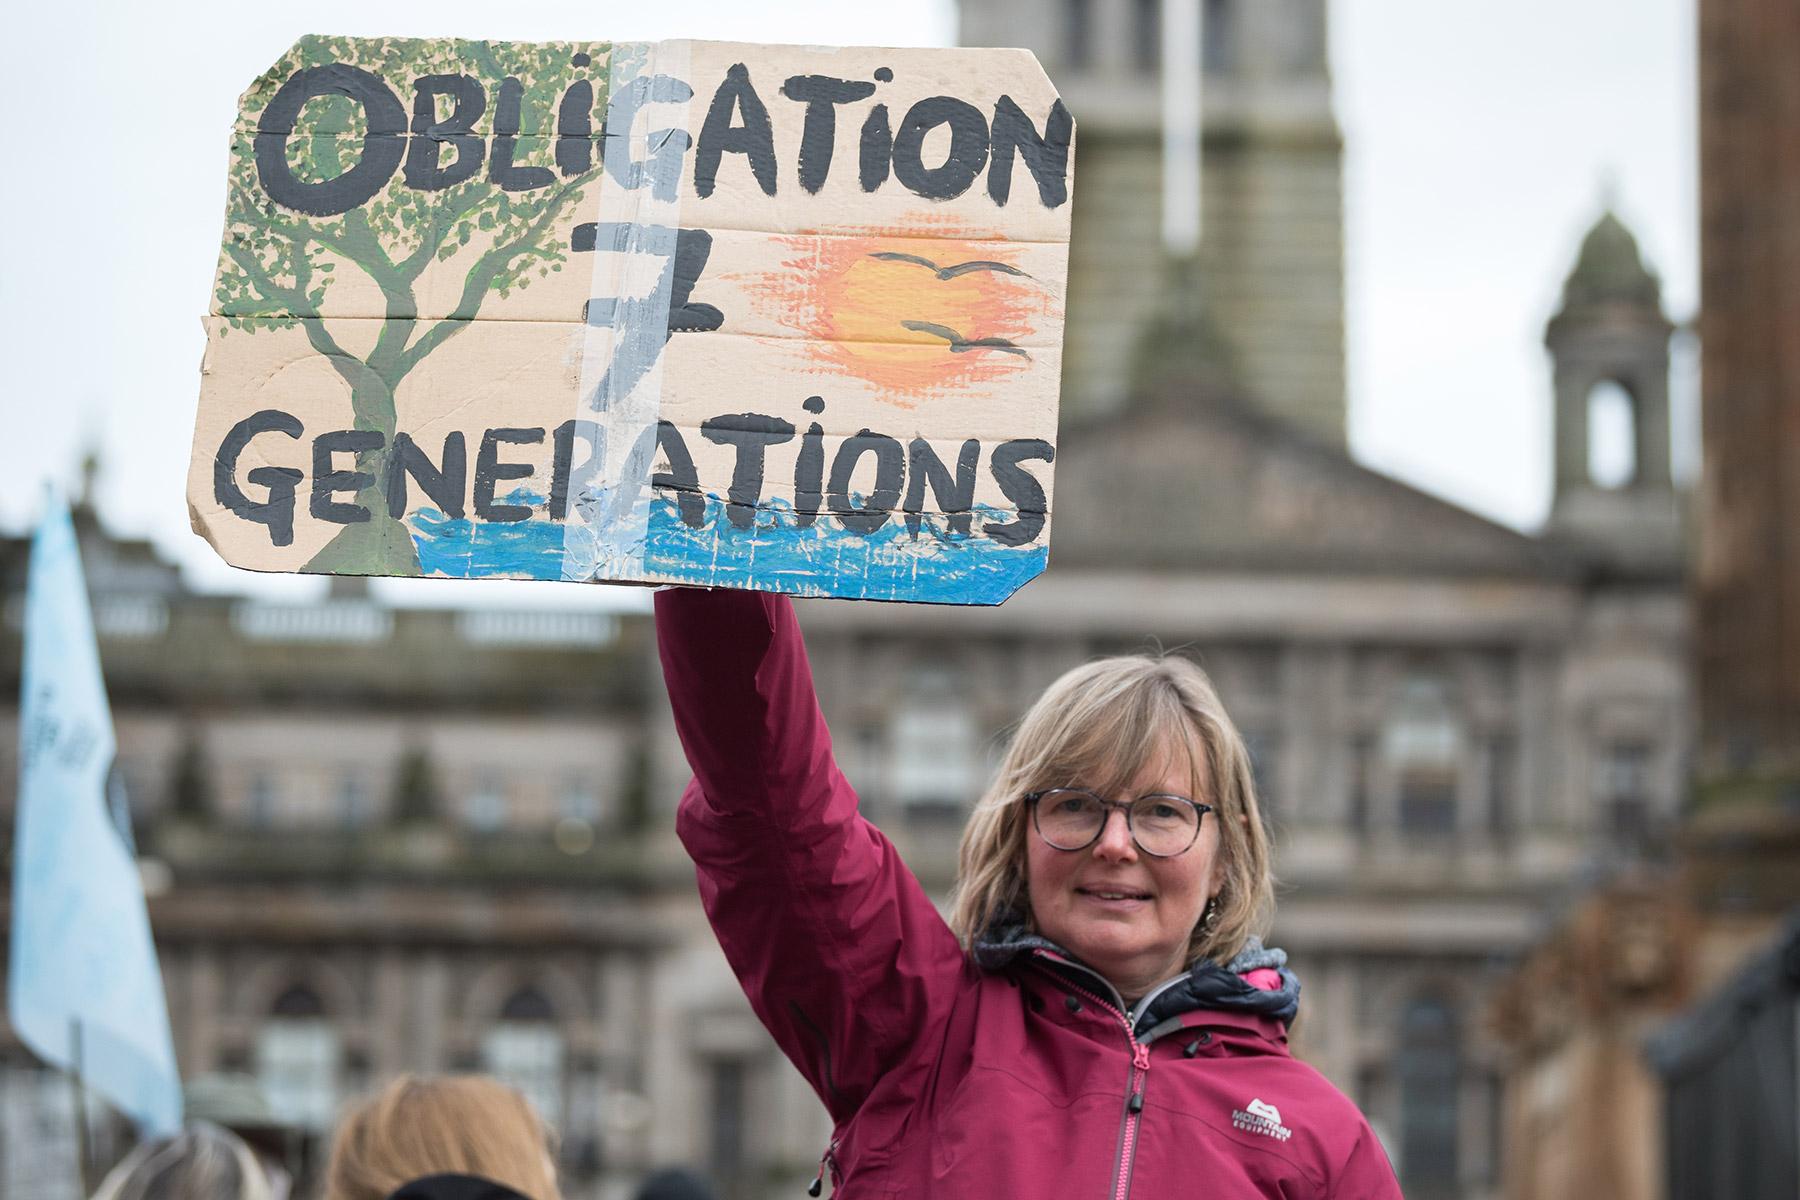 Kathrin Hall holds a sign at an interfaith vigil held at George Square on the opening day of COP26 in Glasgow, Scotland. Photo: LWF/Albin Hillert